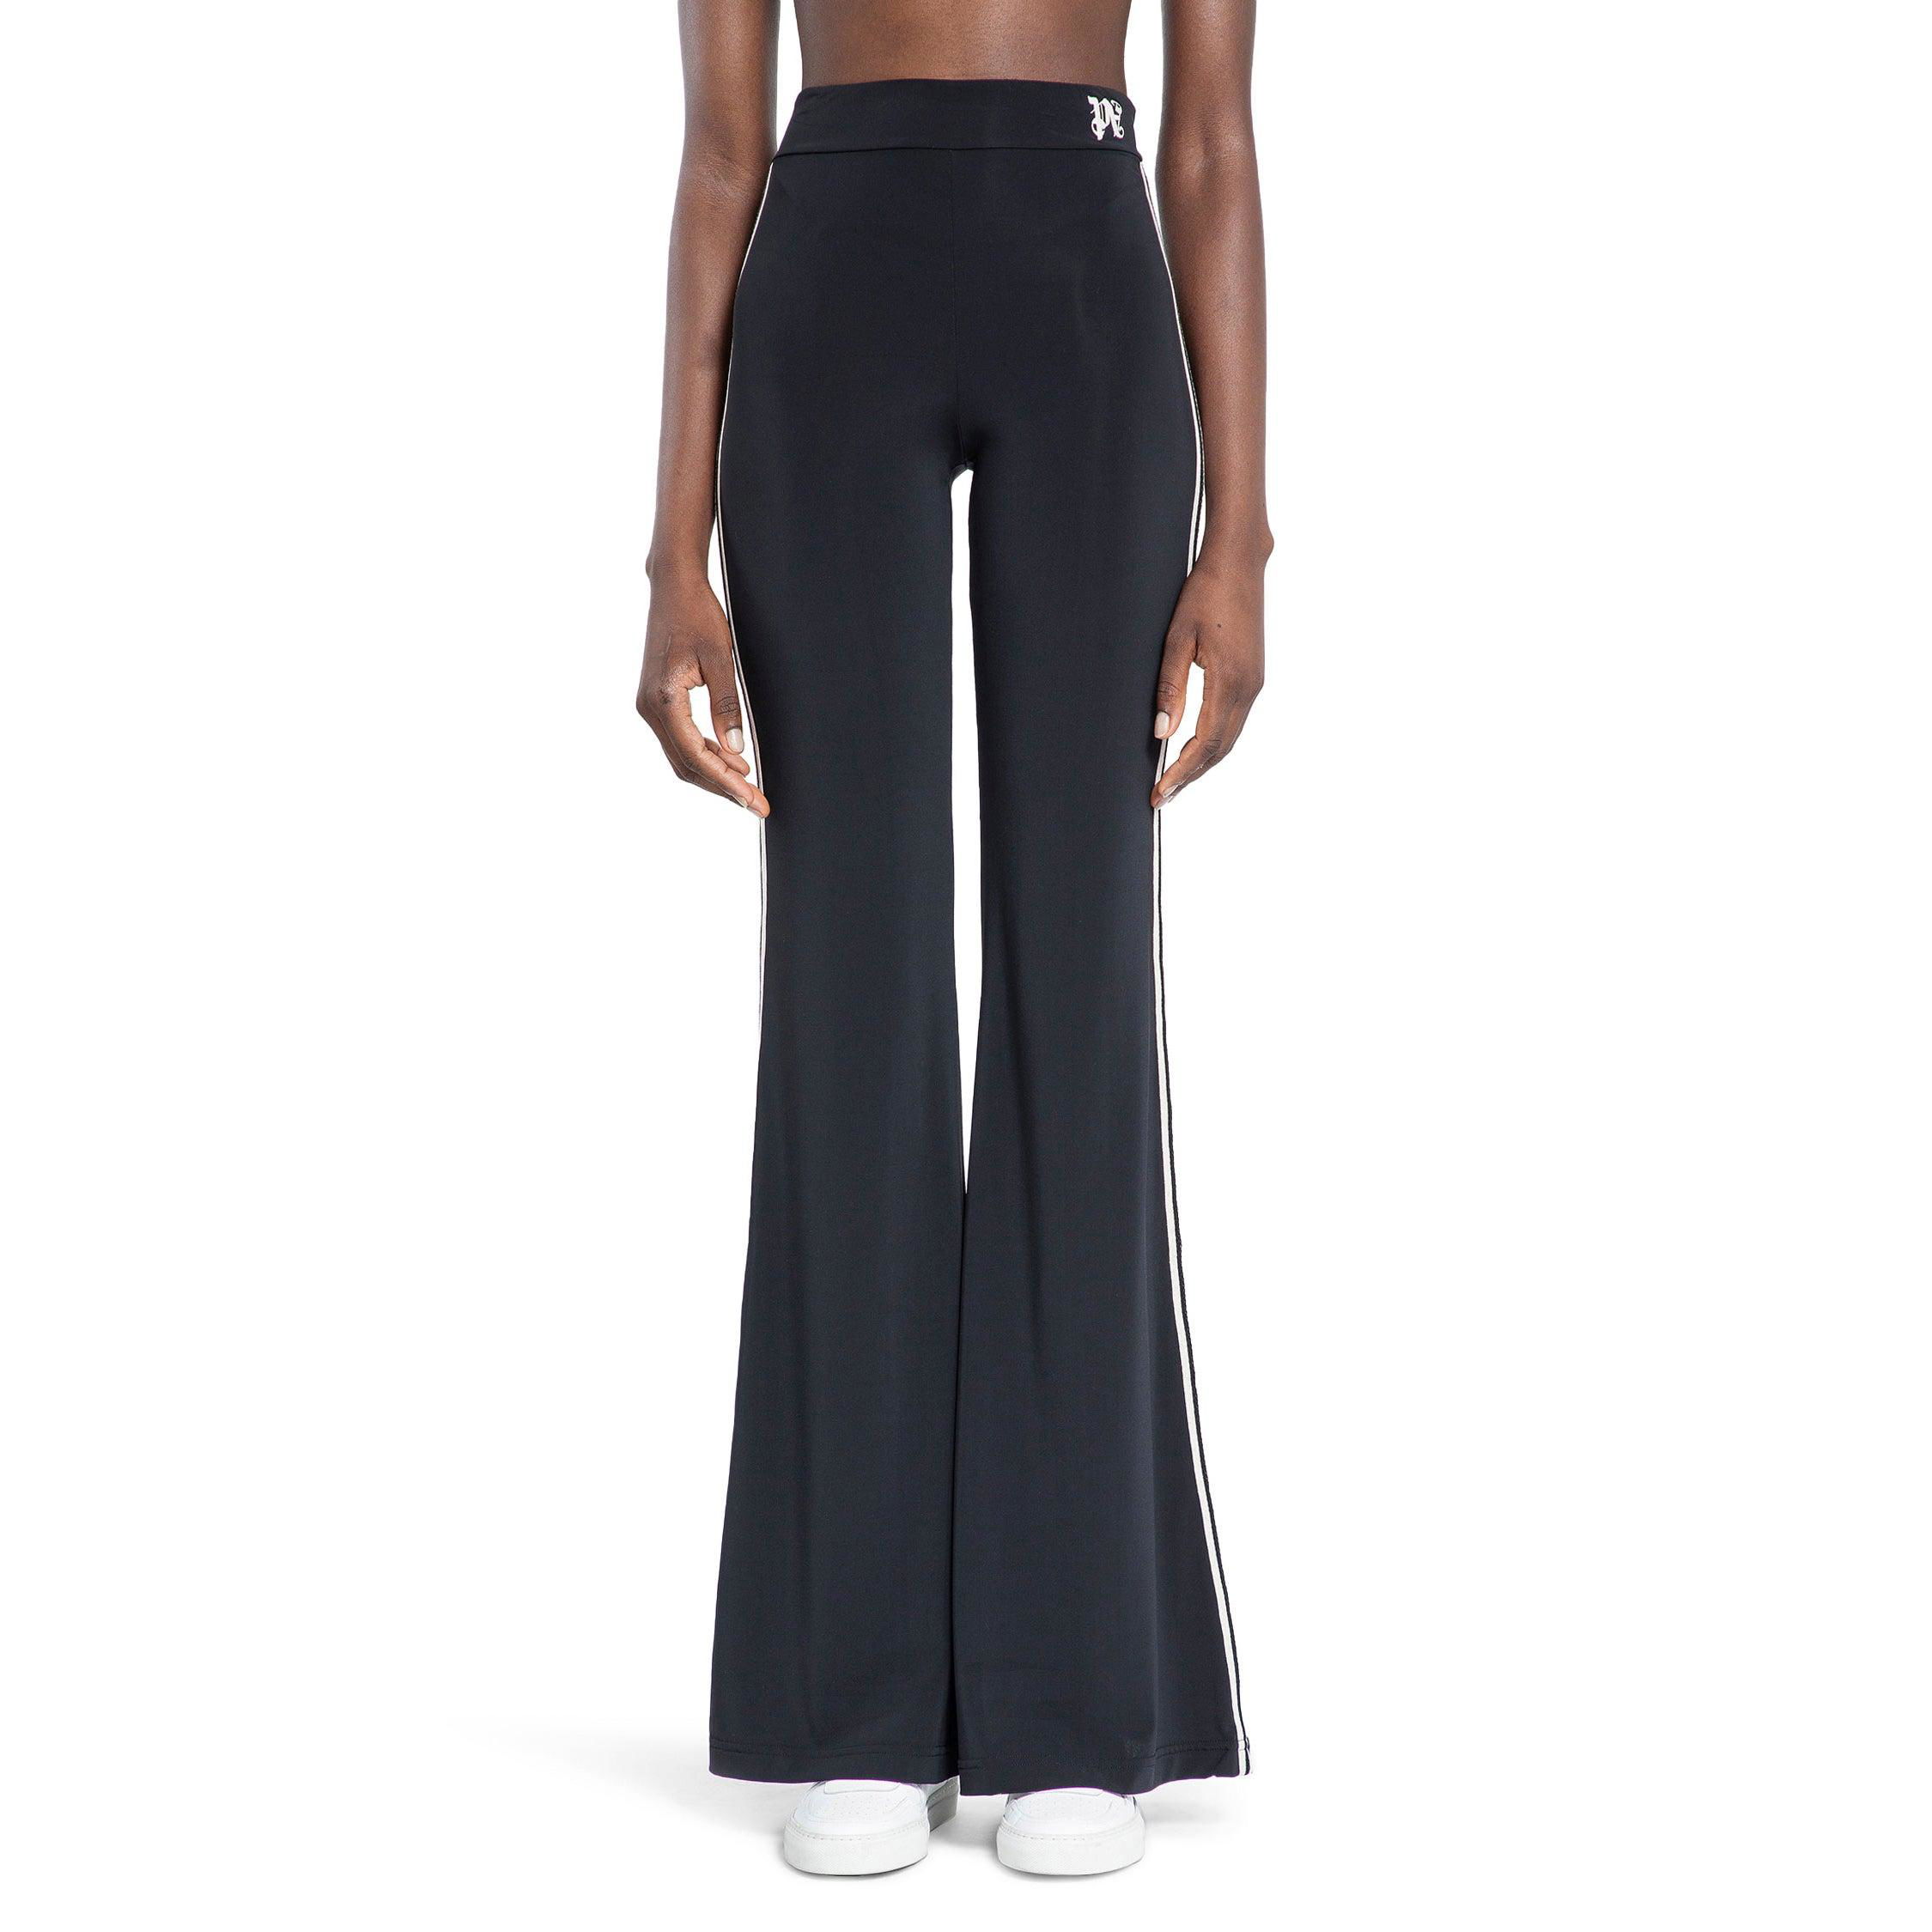 PALANGELS WOMAN BLACK TROUSERS by PALM ANGELS